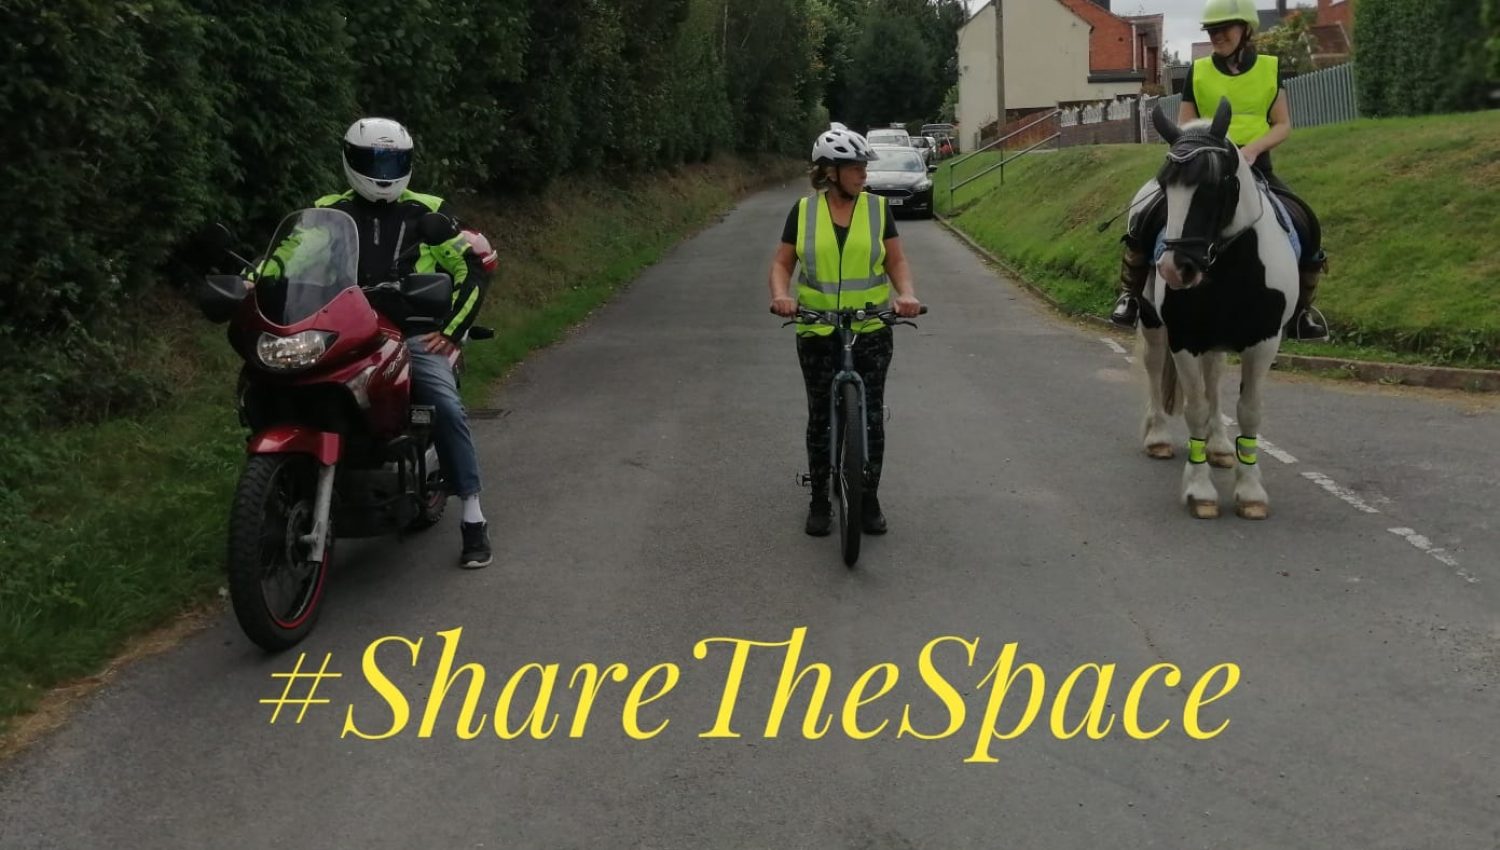 share the space photo motorcyclist cyclist and horse rider